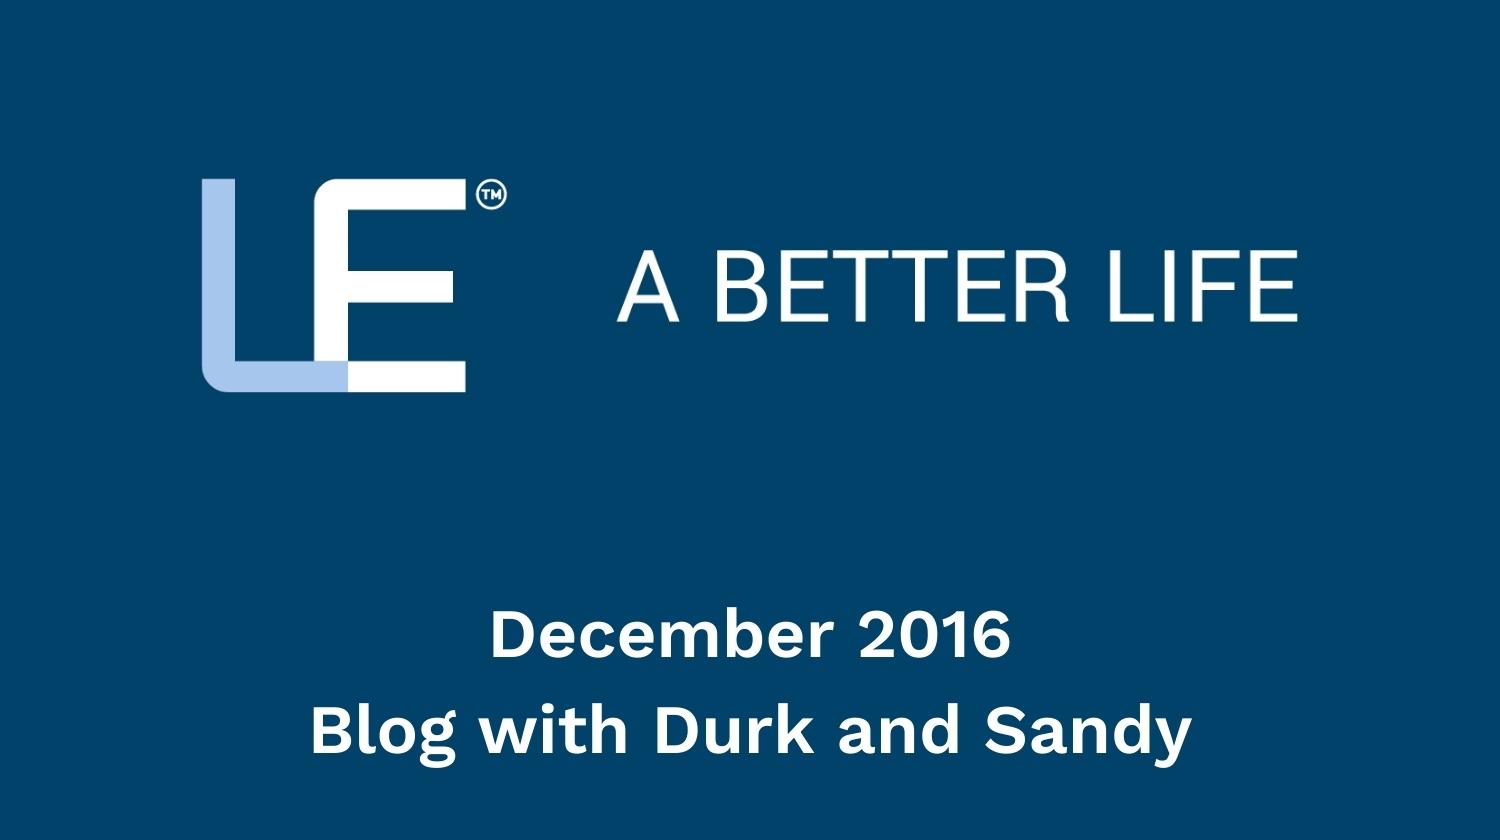 December 2016 Blog with Durk and Sandy